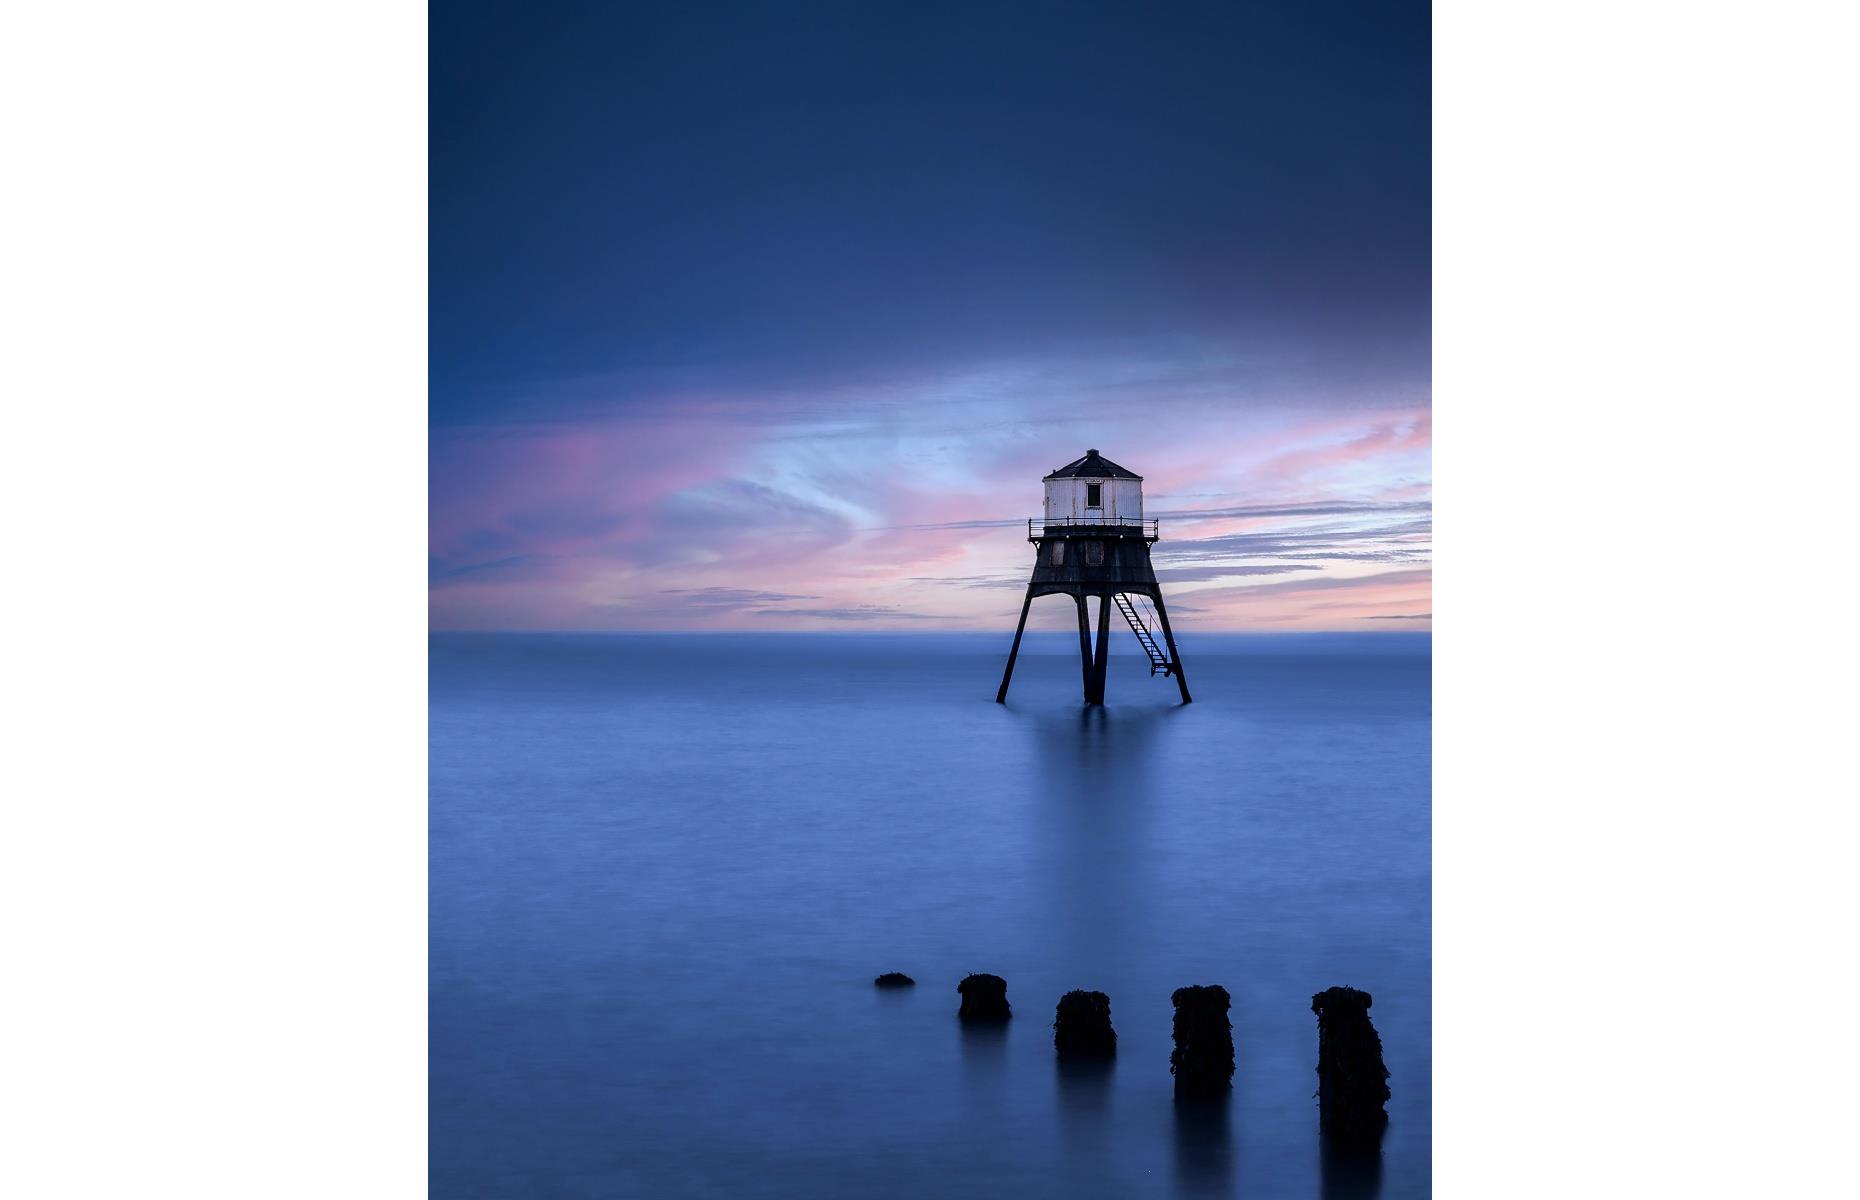 There are two beacons which grace this stretch of the Essex coastline: the High and Low lighthouse, both of which were built in 1863 to guide vessels around Languard Point. In this serene image, photographer Mark Roche highlights their architectural beauty, with the beacon casting a stark silhouette against the blues, indigos and violets of sunset.